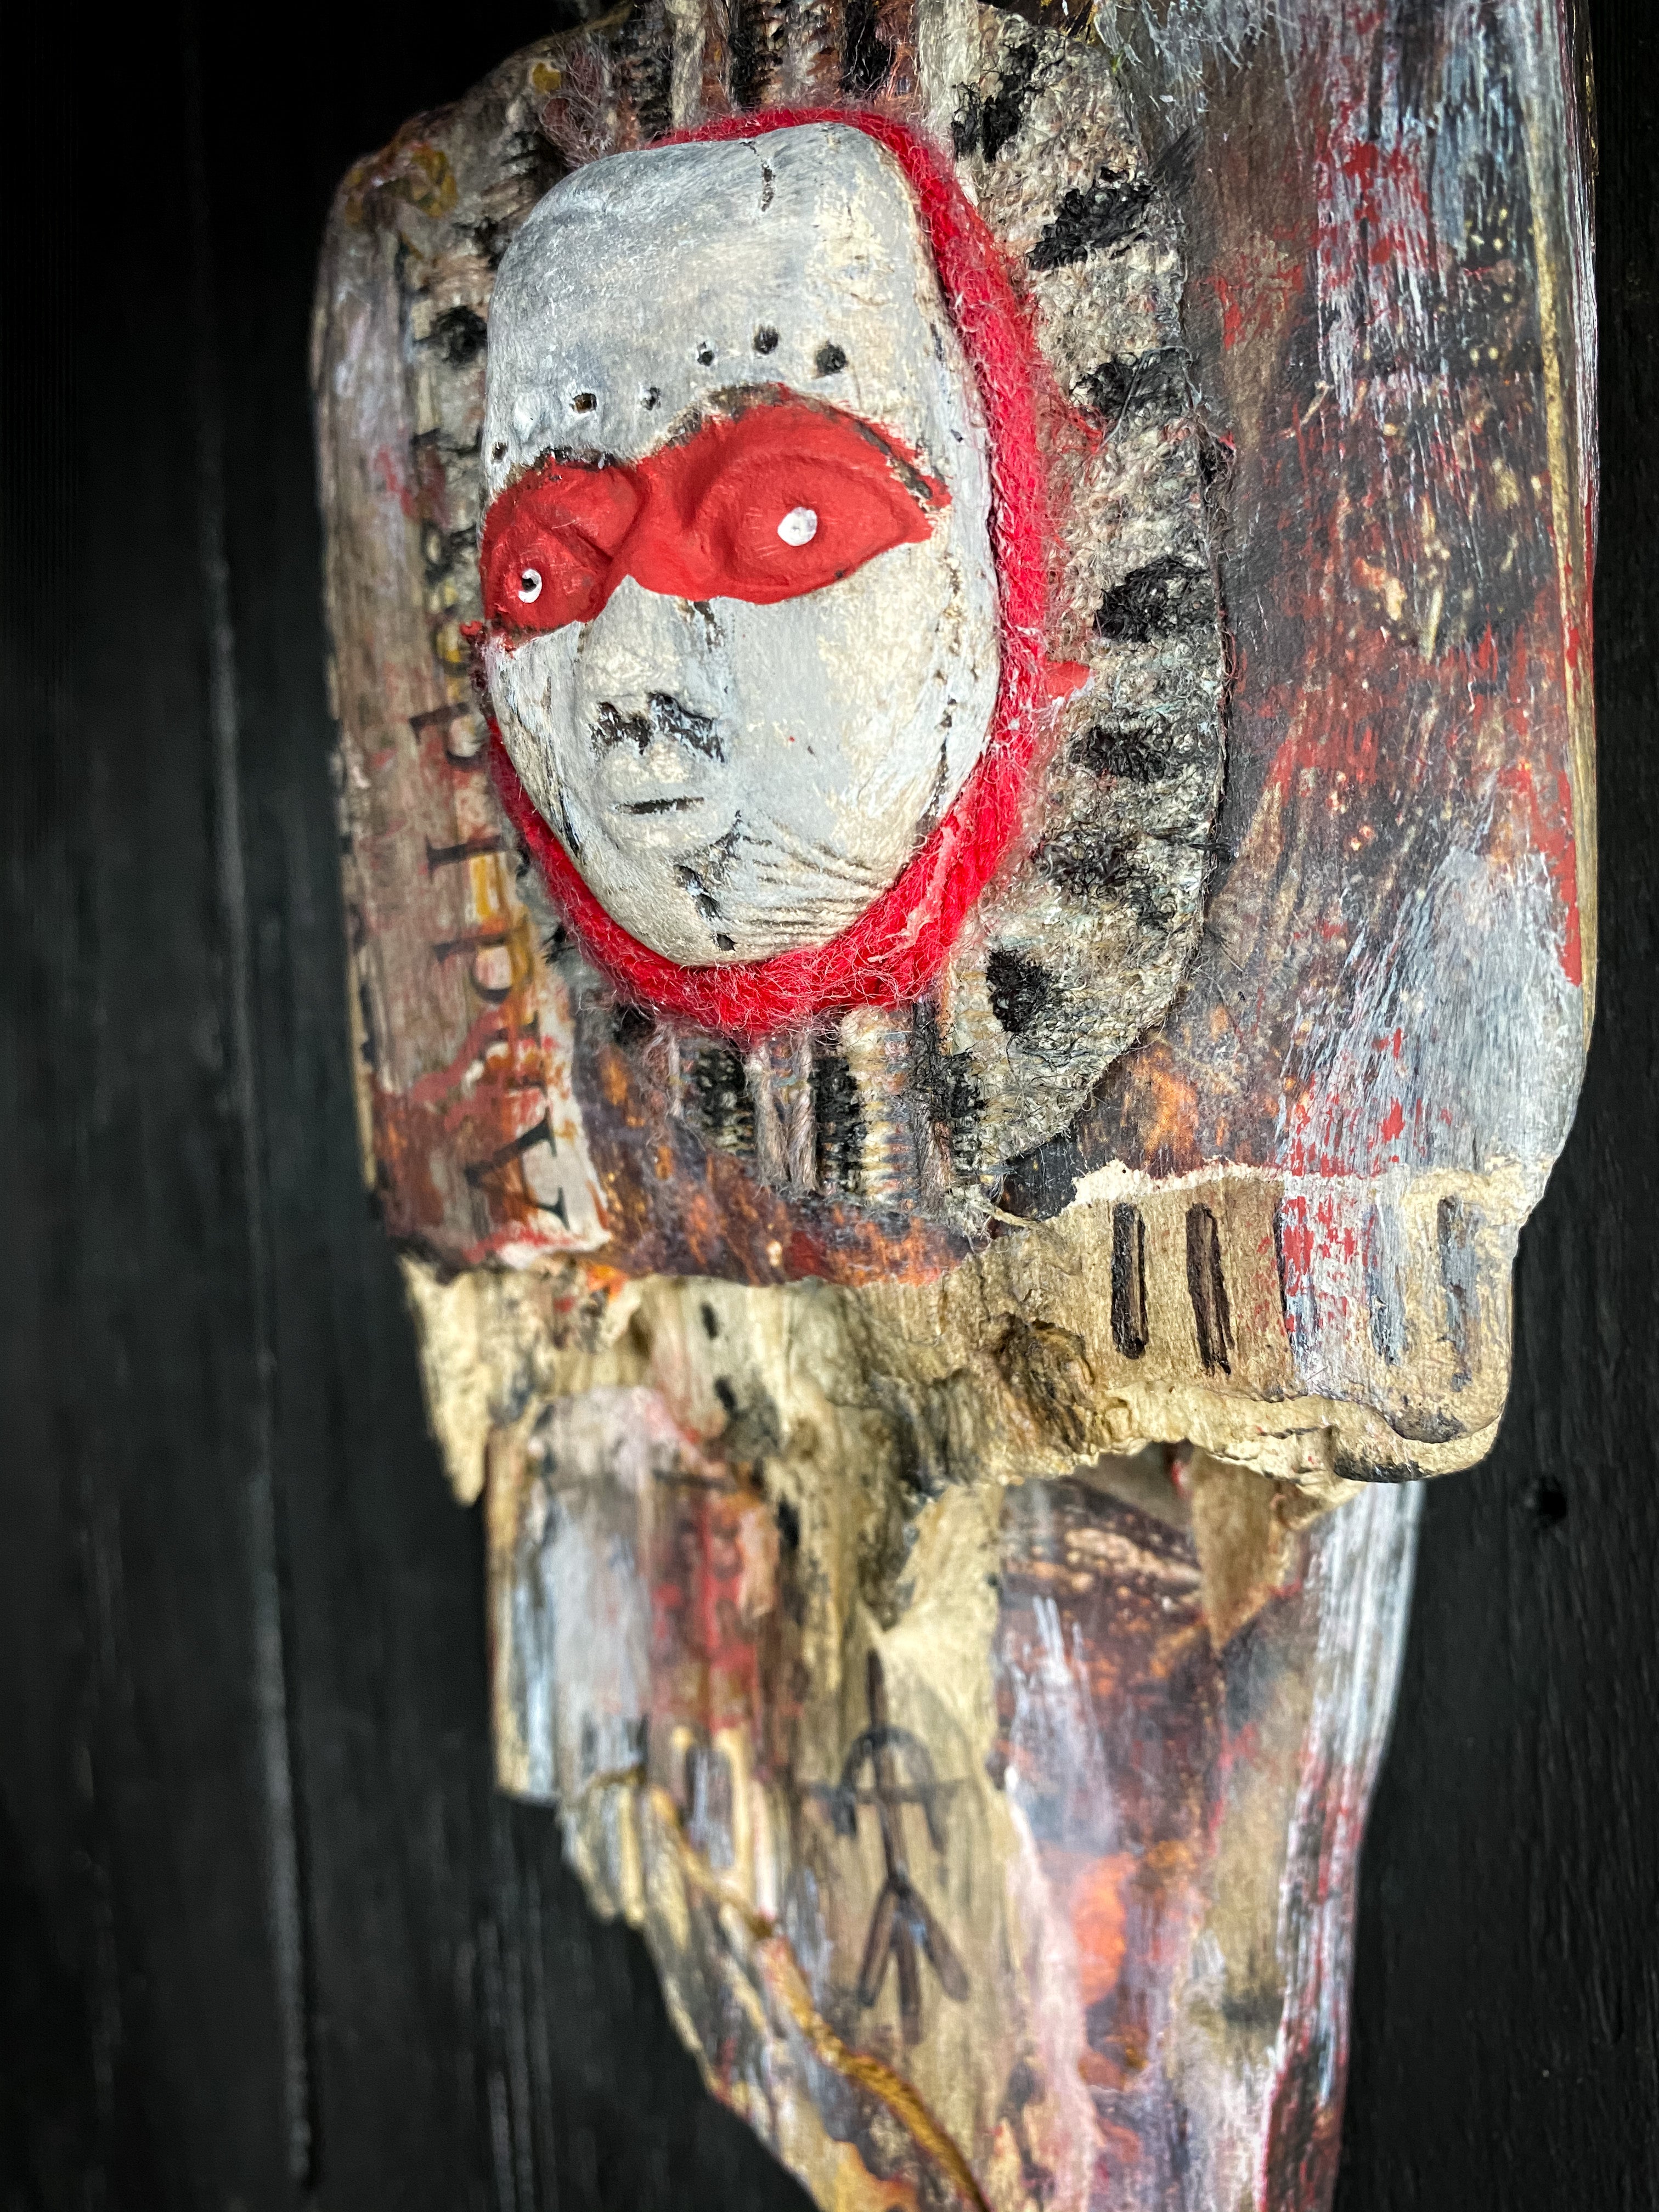 A New Breed - Mixed Media Assemblage Wall Hanging